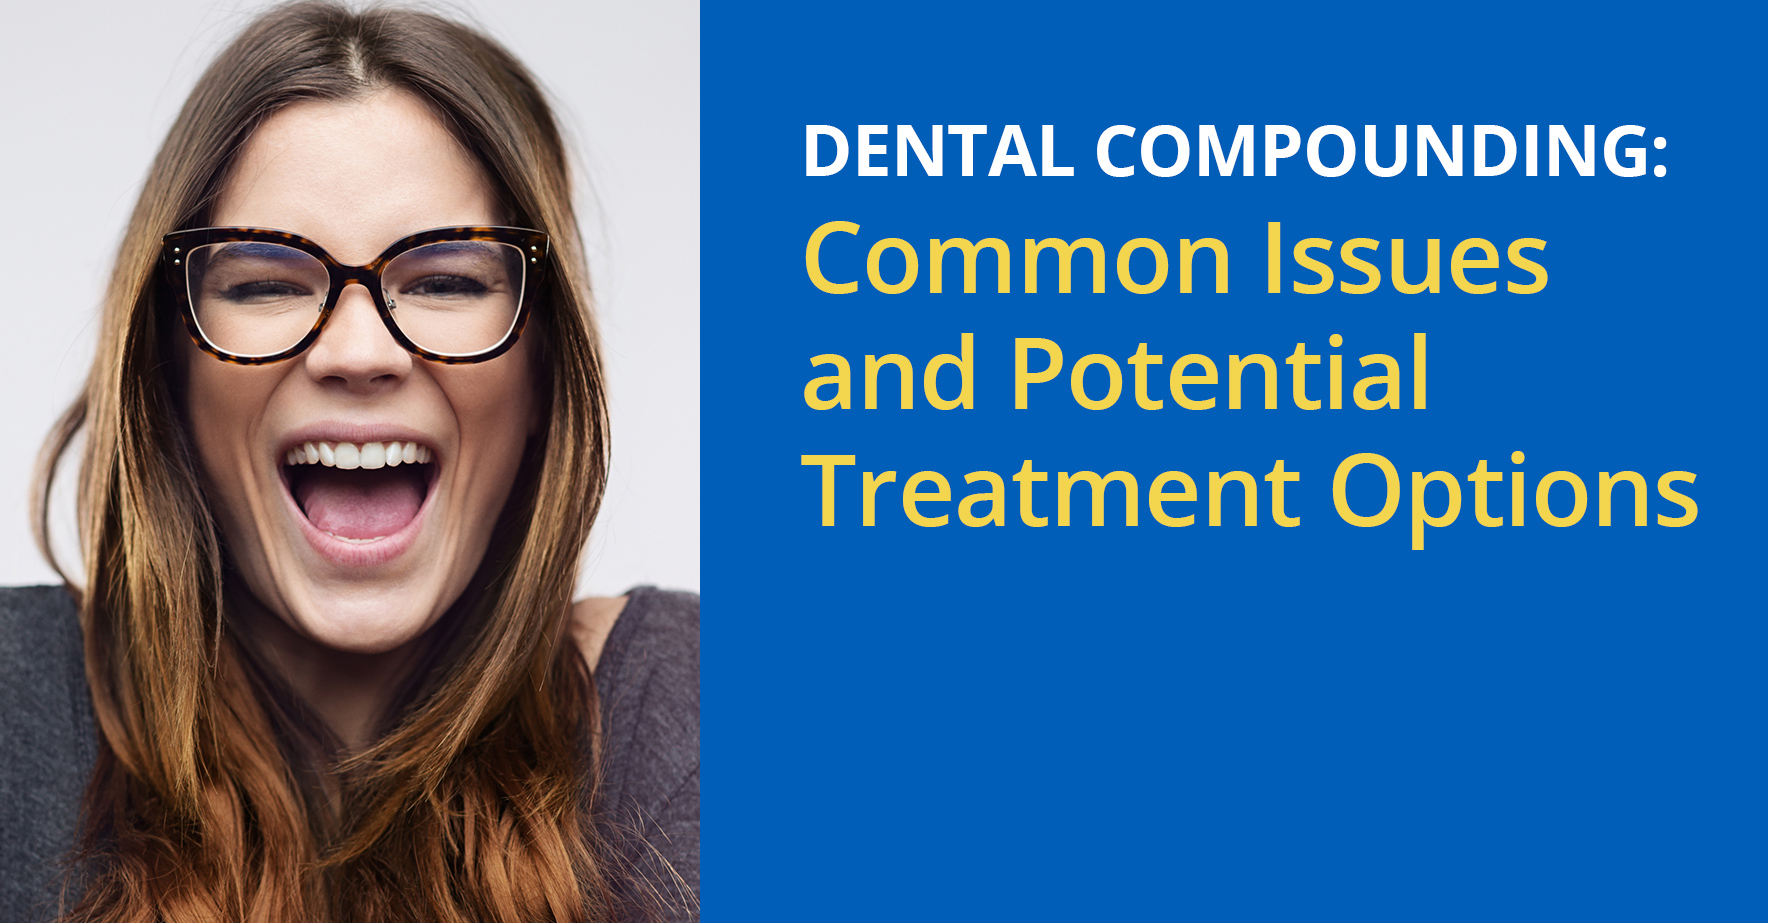 Dental_Compounding_Common_Issues_and_Potential_Treatment_Options.jpg